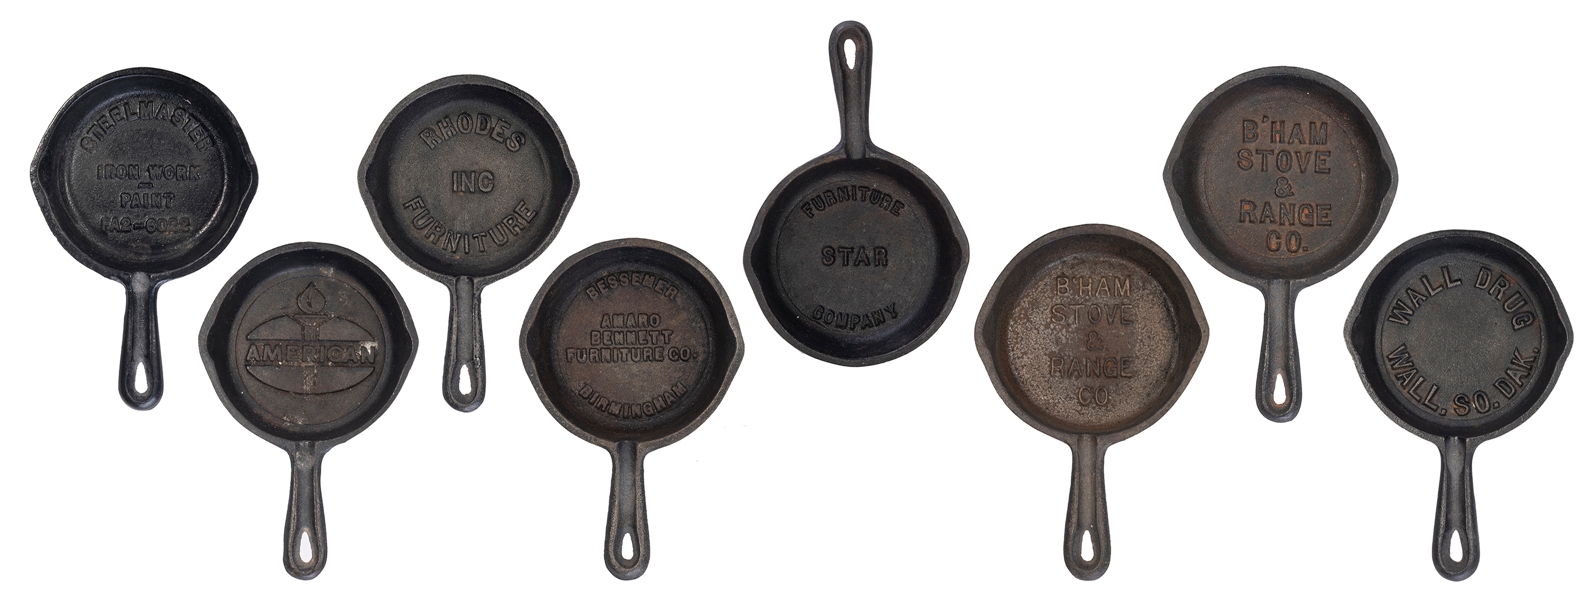  Lot of Mini-Cast Iron Advertising Pans. Eight pans total. P...